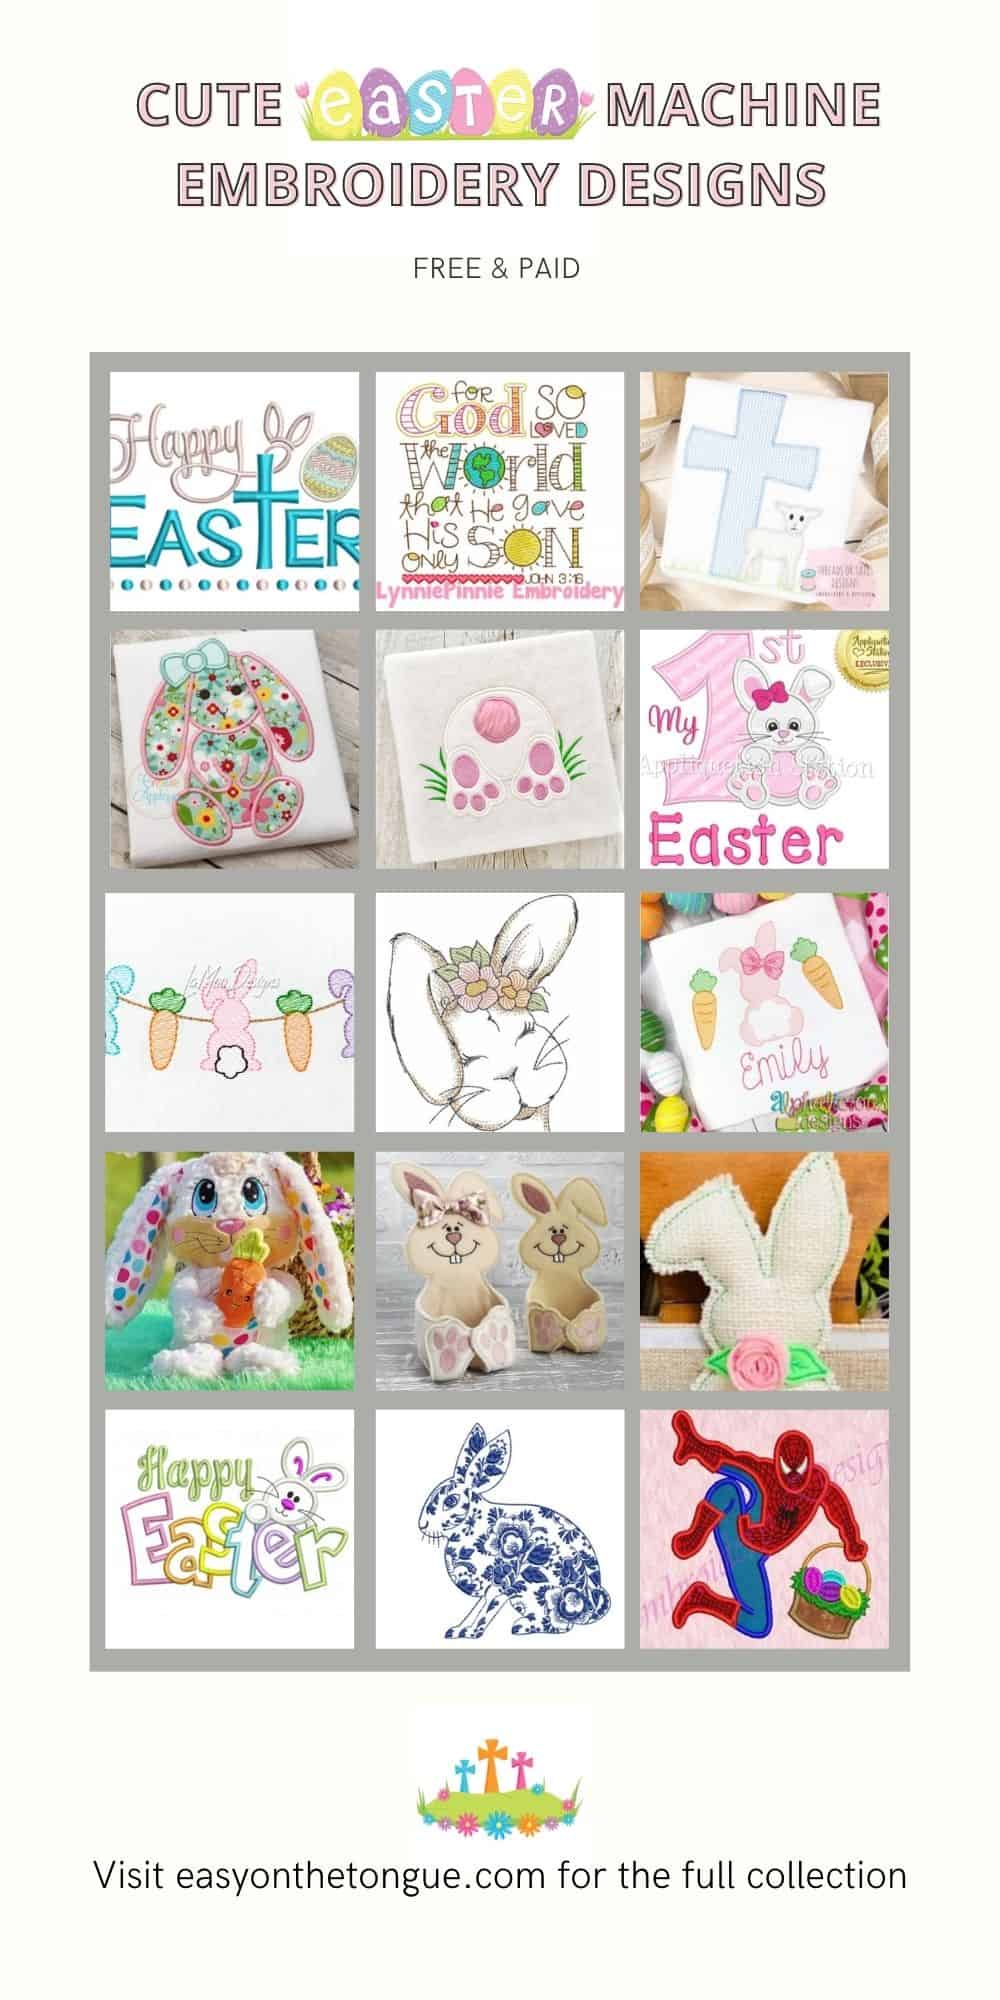 Cute Easter Machine Embroidery Design full collection on easyonthetongue.com  Cute Easter Machine Embroidery Designs (Free and Etsy)